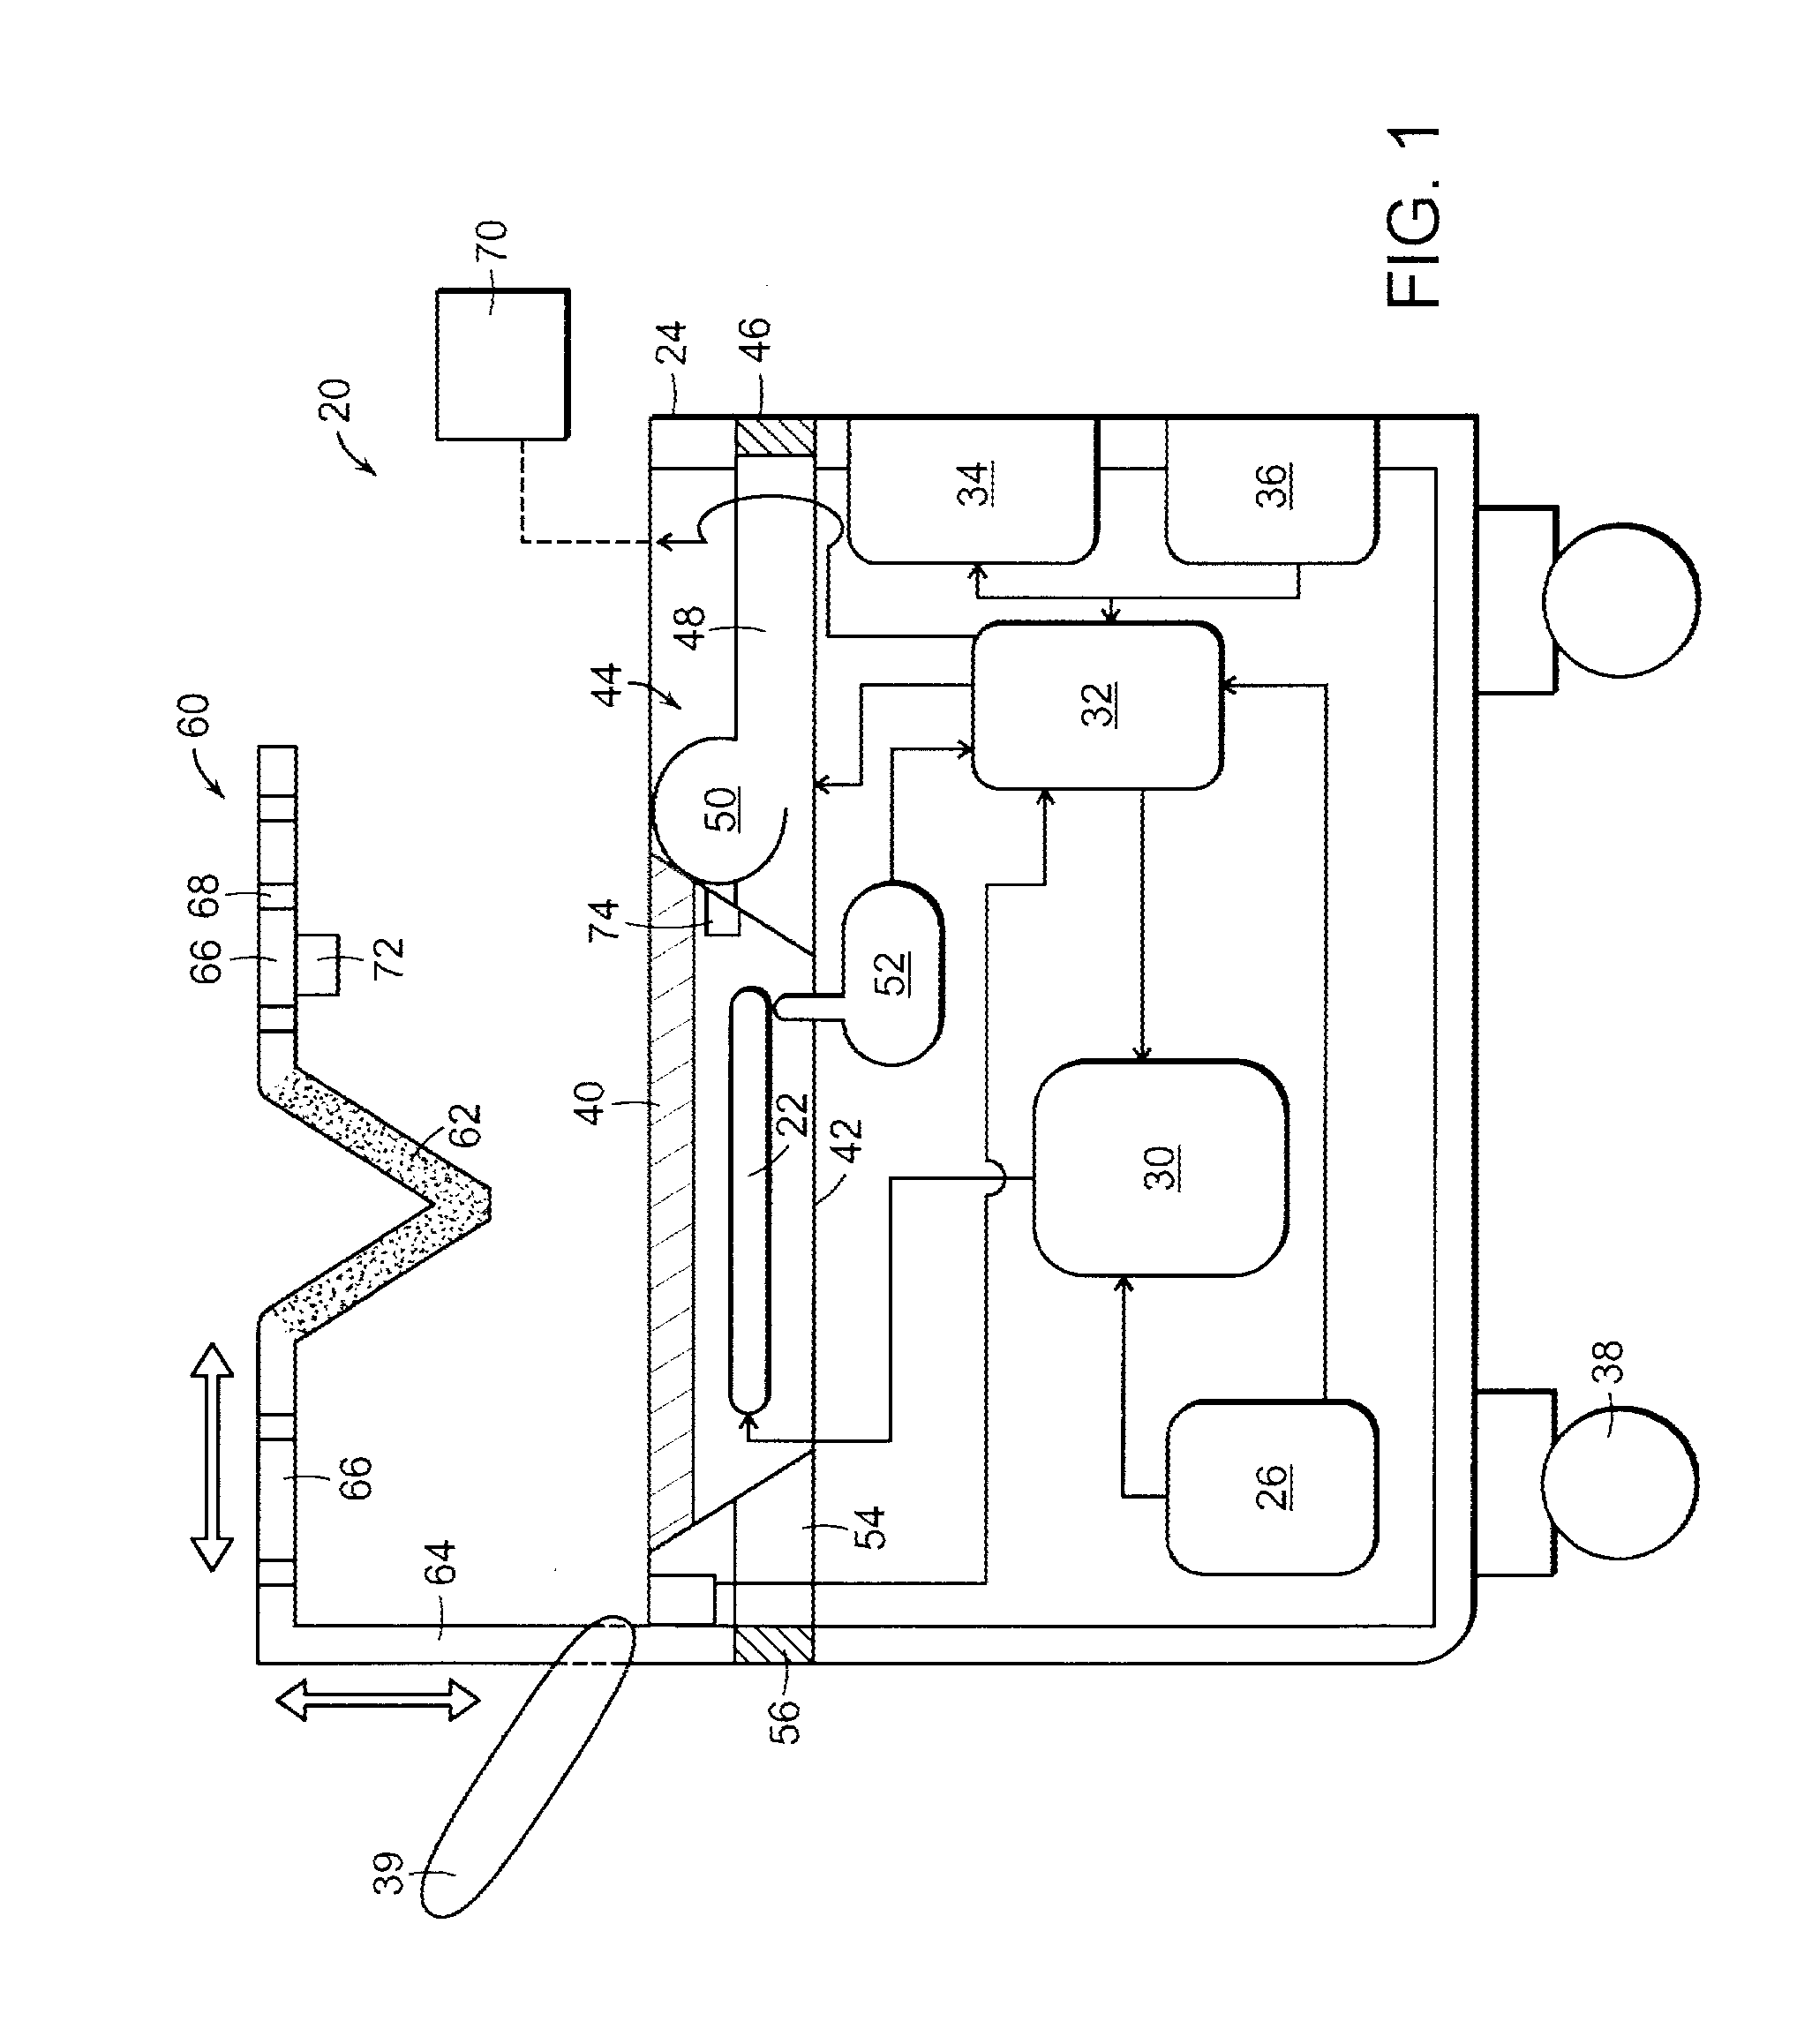 Systems which Determine Operating Parameters and Disinfection Schedules for Germicidal Devices and Germicidal Lamp Apparatuses Including Lens Systems